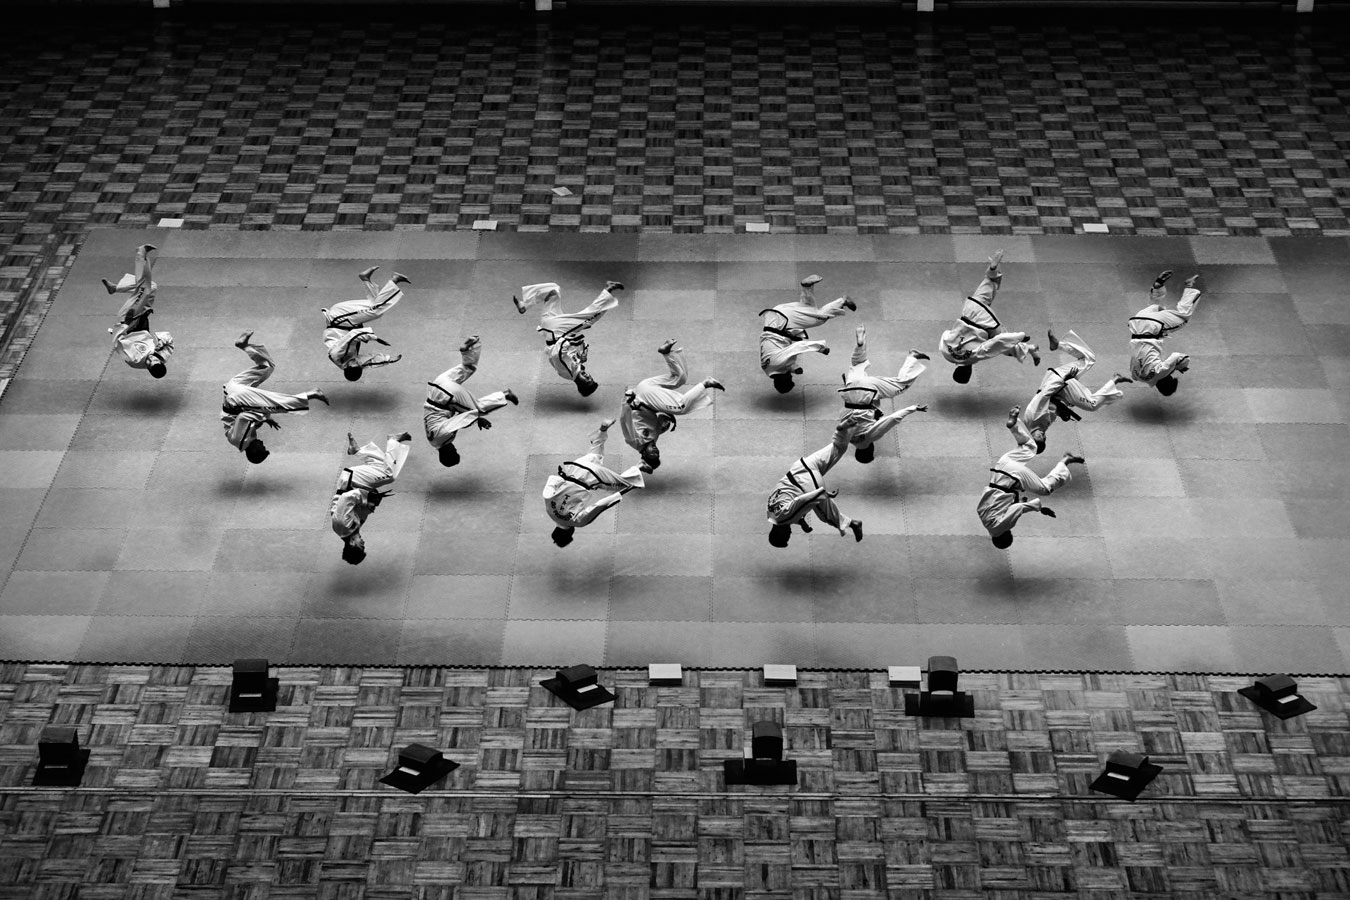 Taekwondo North Korea Style, © Alain Schroeder, Brussels, Belgium, World In Focus - The Ultimate Travel Photography Competition